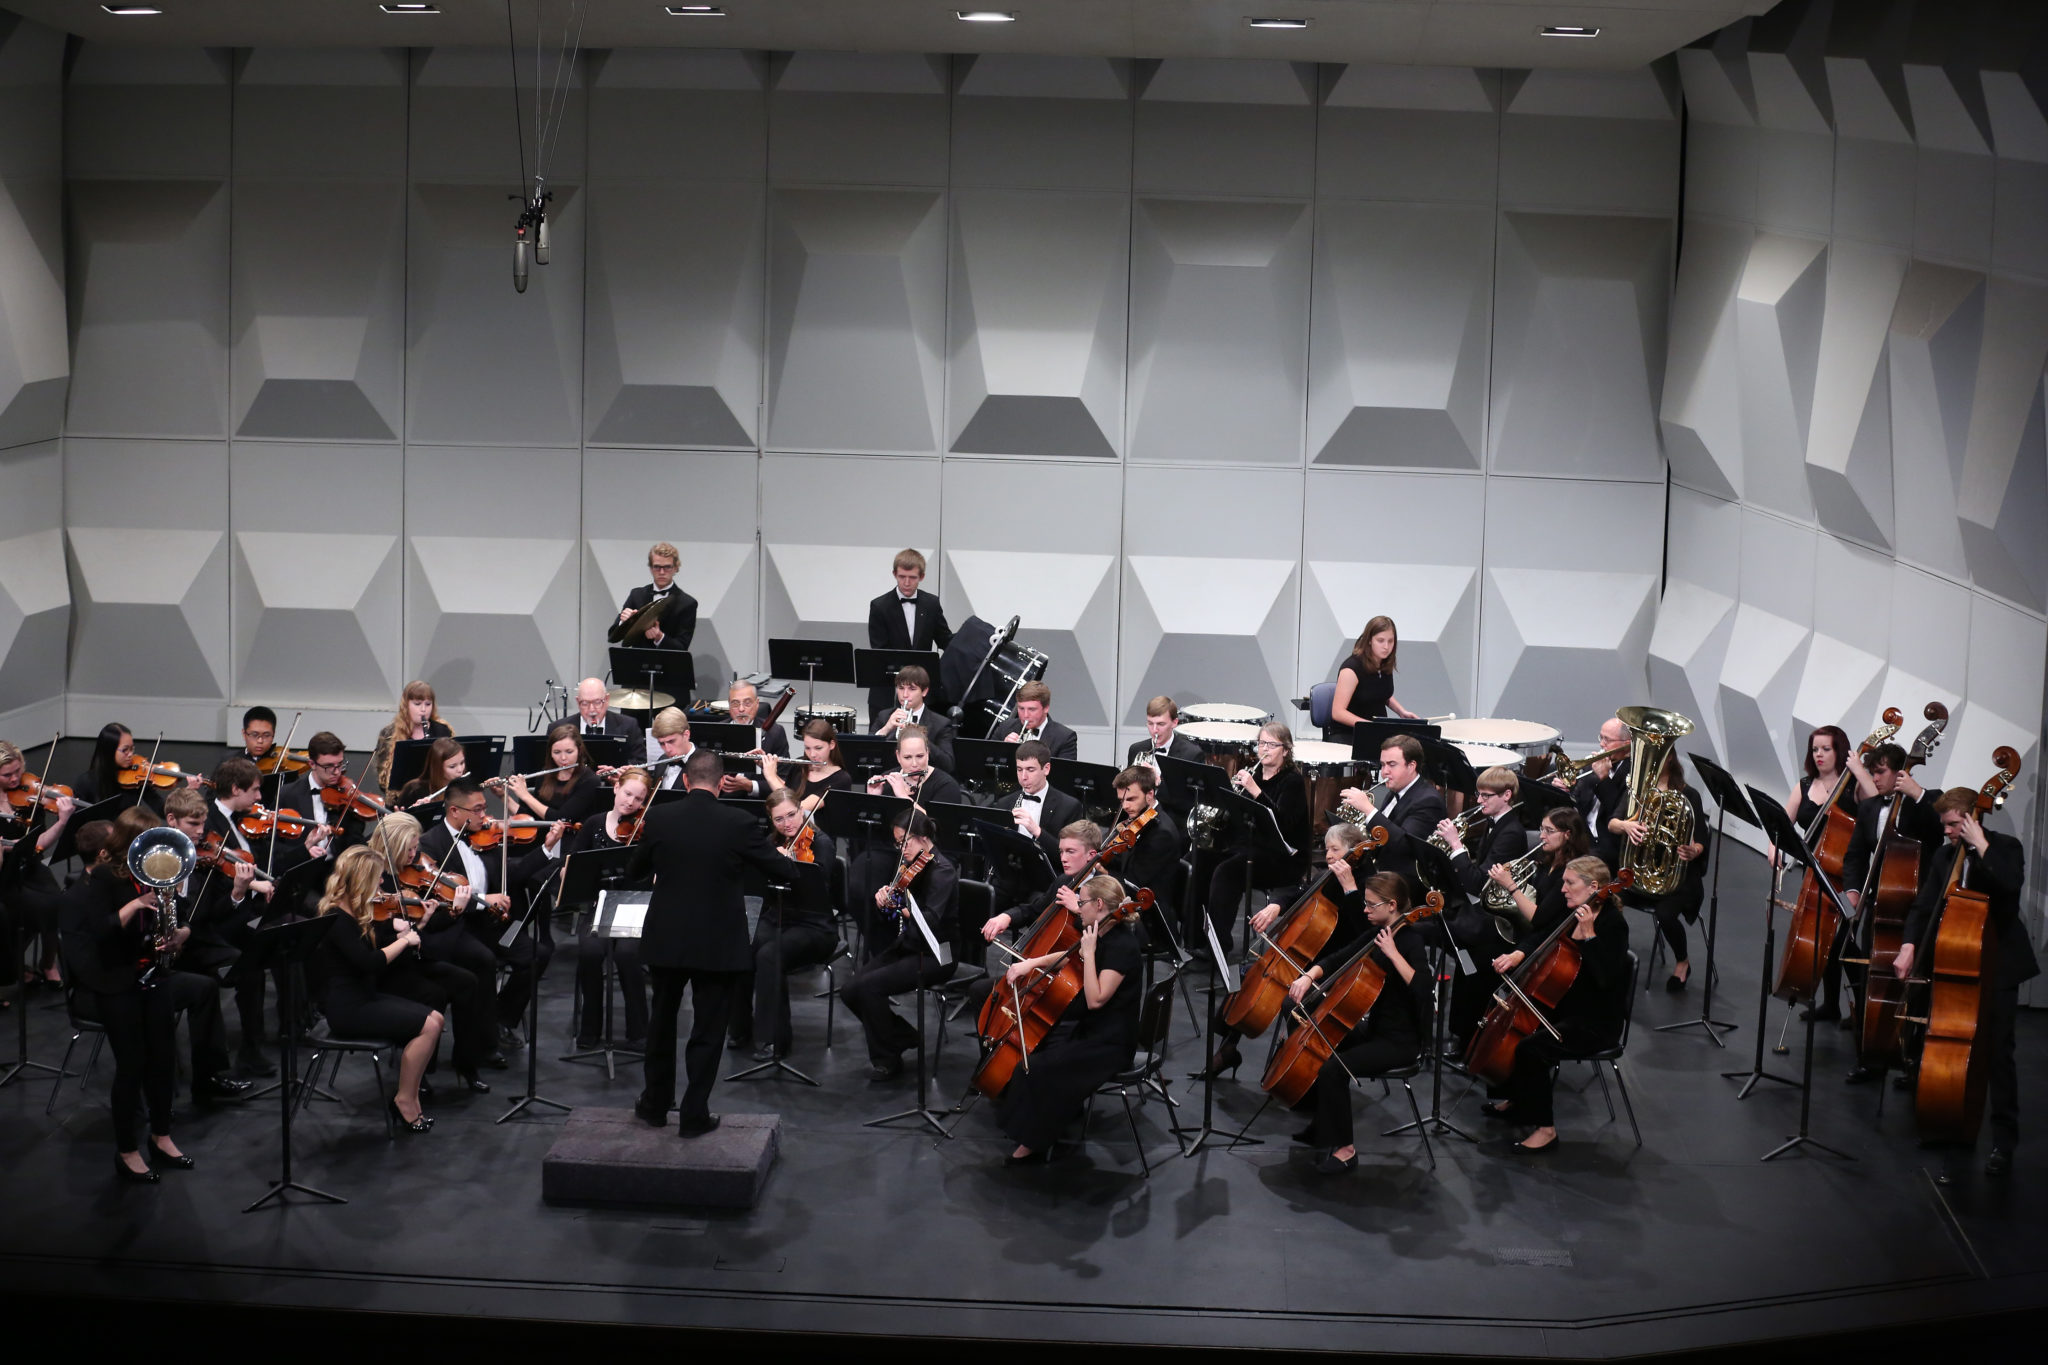 Missouri S&T – News and Events – Guest cellist to perform with Missouri S&T orchestra on April 17